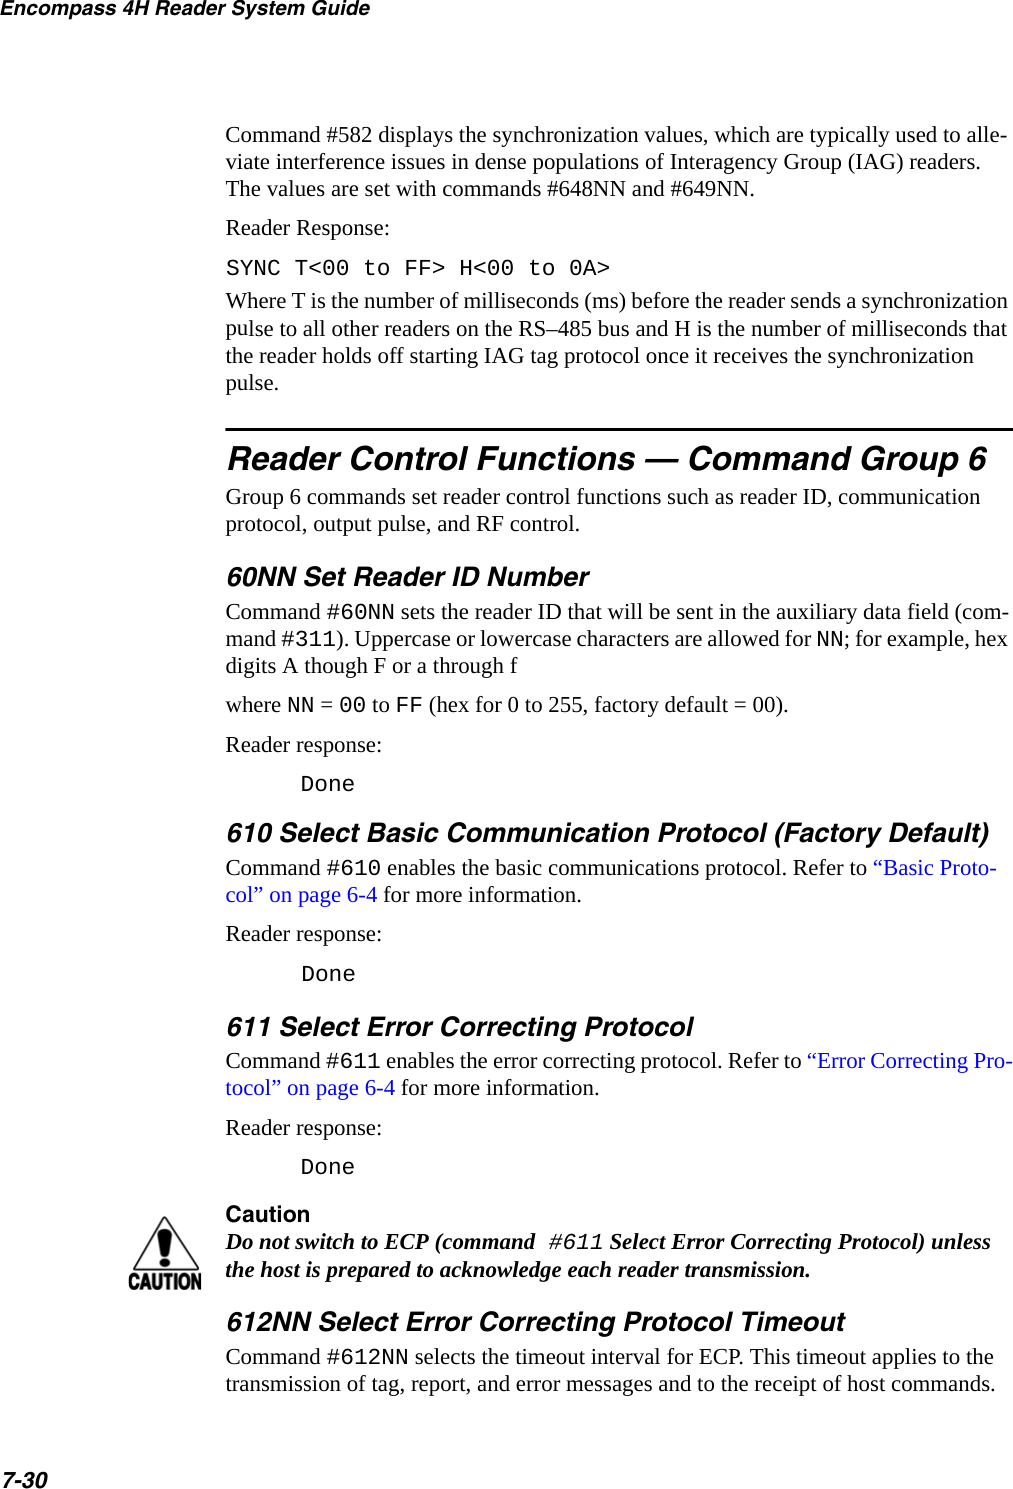 Encompass 4H Reader System Guide7-30Command #582 displays the synchronization values, which are typically used to alle-viate interference issues in dense populations of Interagency Group (IAG) readers. The values are set with commands #648NN and #649NN.Reader Response:SYNC T&lt;00 to FF&gt; H&lt;00 to 0A&gt;Where T is the number of milliseconds (ms) before the reader sends a synchronization pulse to all other readers on the RS–485 bus and H is the number of milliseconds that the reader holds off starting IAG tag protocol once it receives the synchronization pulse.Reader Control Functions — Command Group 6Group 6 commands set reader control functions such as reader ID, communication protocol, output pulse, and RF control.60NN Set Reader ID NumberCommand #60NN sets the reader ID that will be sent in the auxiliary data field (com-mand #311). Uppercase or lowercase characters are allowed for NN; for example, hex digits A though F or a through fwhere NN = 00 to FF (hex for 0 to 255, factory default = 00).Reader response:Done610 Select Basic Communication Protocol (Factory Default)Command #610 enables the basic communications protocol. Refer to “Basic Proto-col” on page 6-4 for more information.Reader response:Done 611 Select Error Correcting ProtocolCommand #611 enables the error correcting protocol. Refer to “Error Correcting Pro-tocol” on page 6-4 for more information.Reader response:DoneCautionDo not switch to ECP (command #611 Select Error Correcting Protocol) unless the host is prepared to acknowledge each reader transmission.612NN Select Error Correcting Protocol TimeoutCommand #612NN selects the timeout interval for ECP. This timeout applies to the transmission of tag, report, and error messages and to the receipt of host commands. 